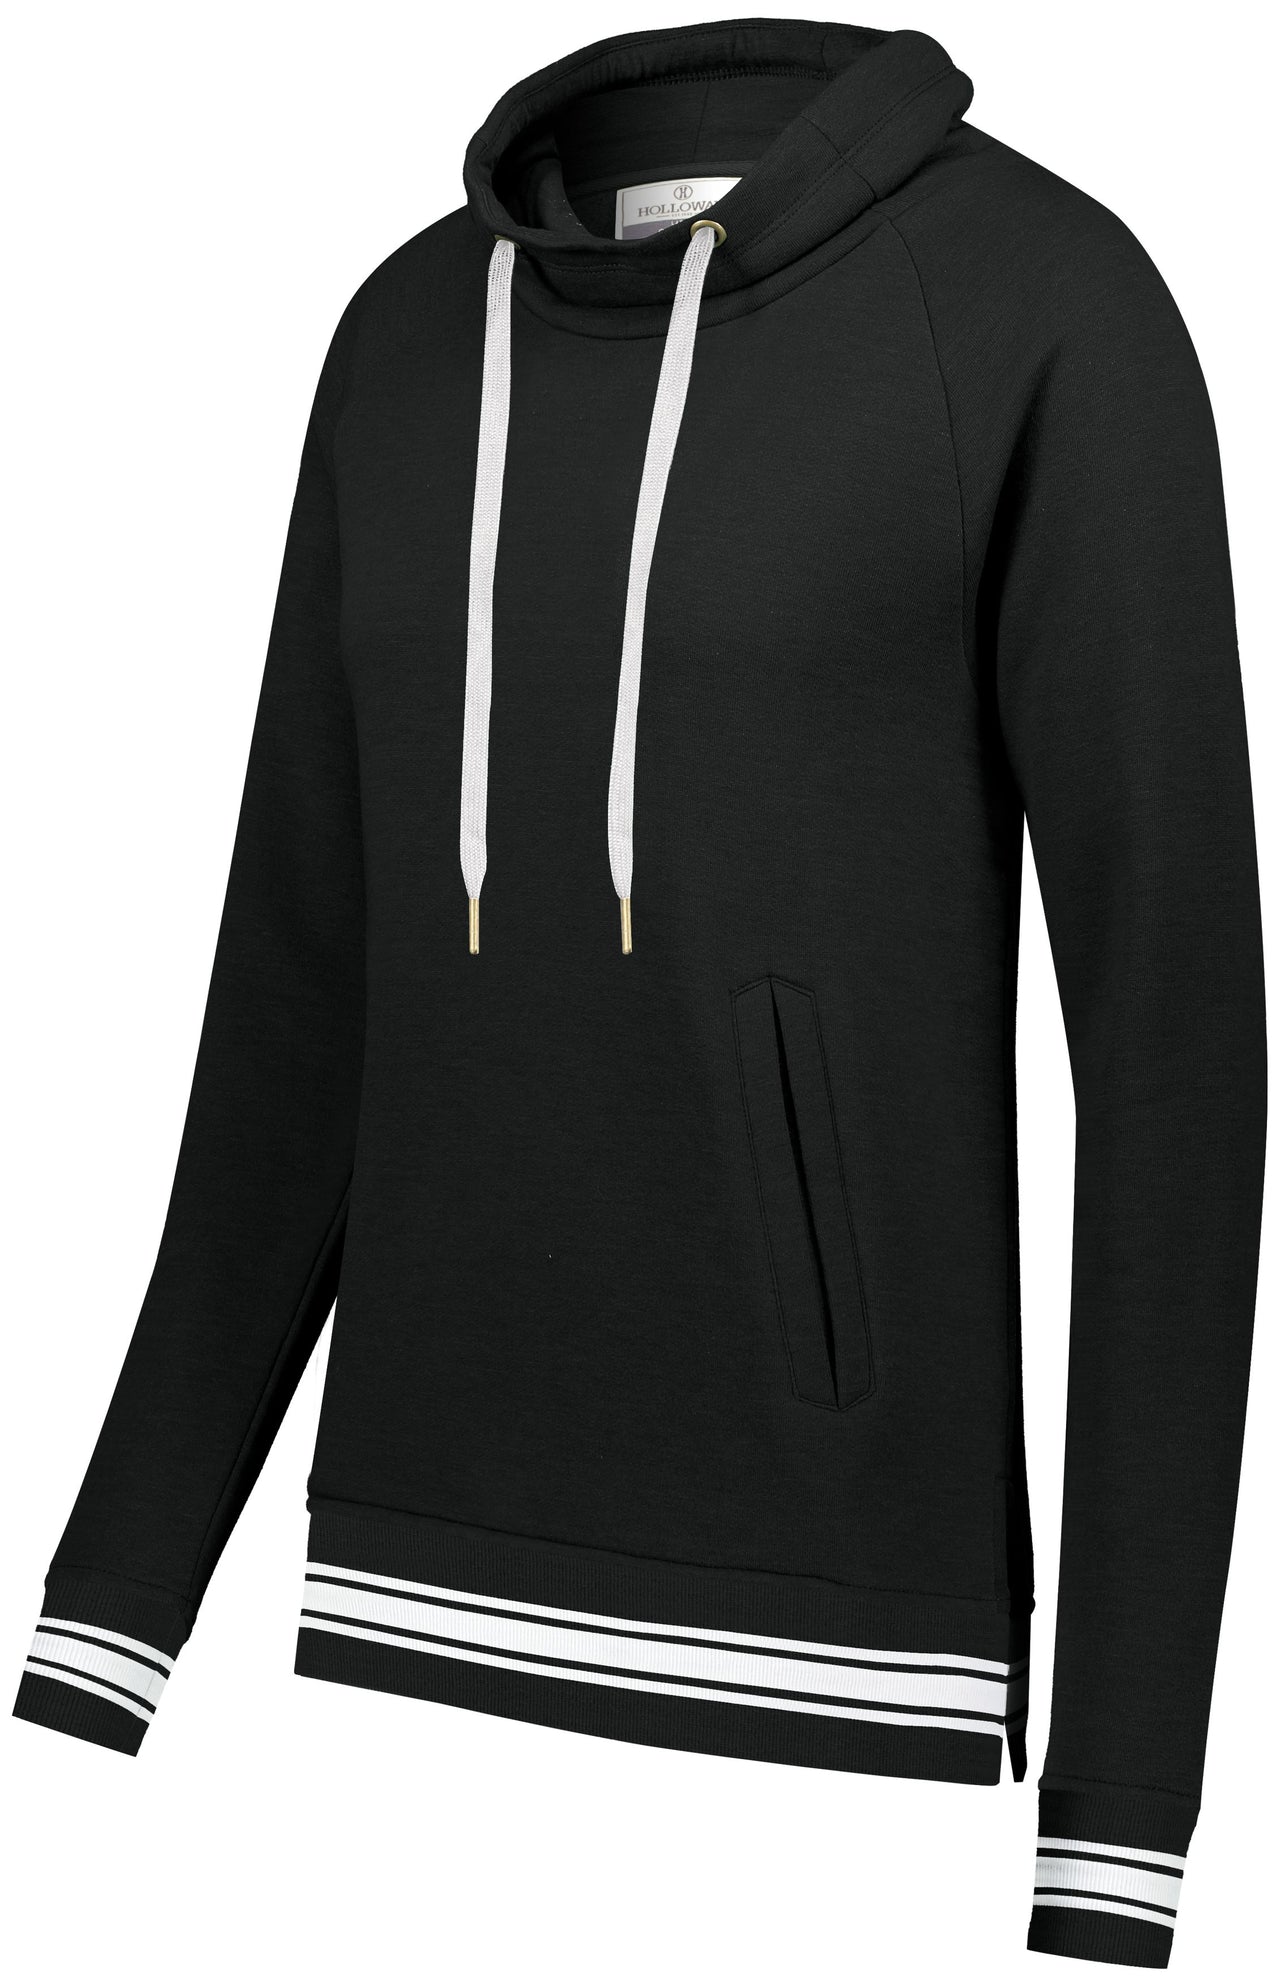 Ladies Ivy League Funnel Neck Pullover - 229763